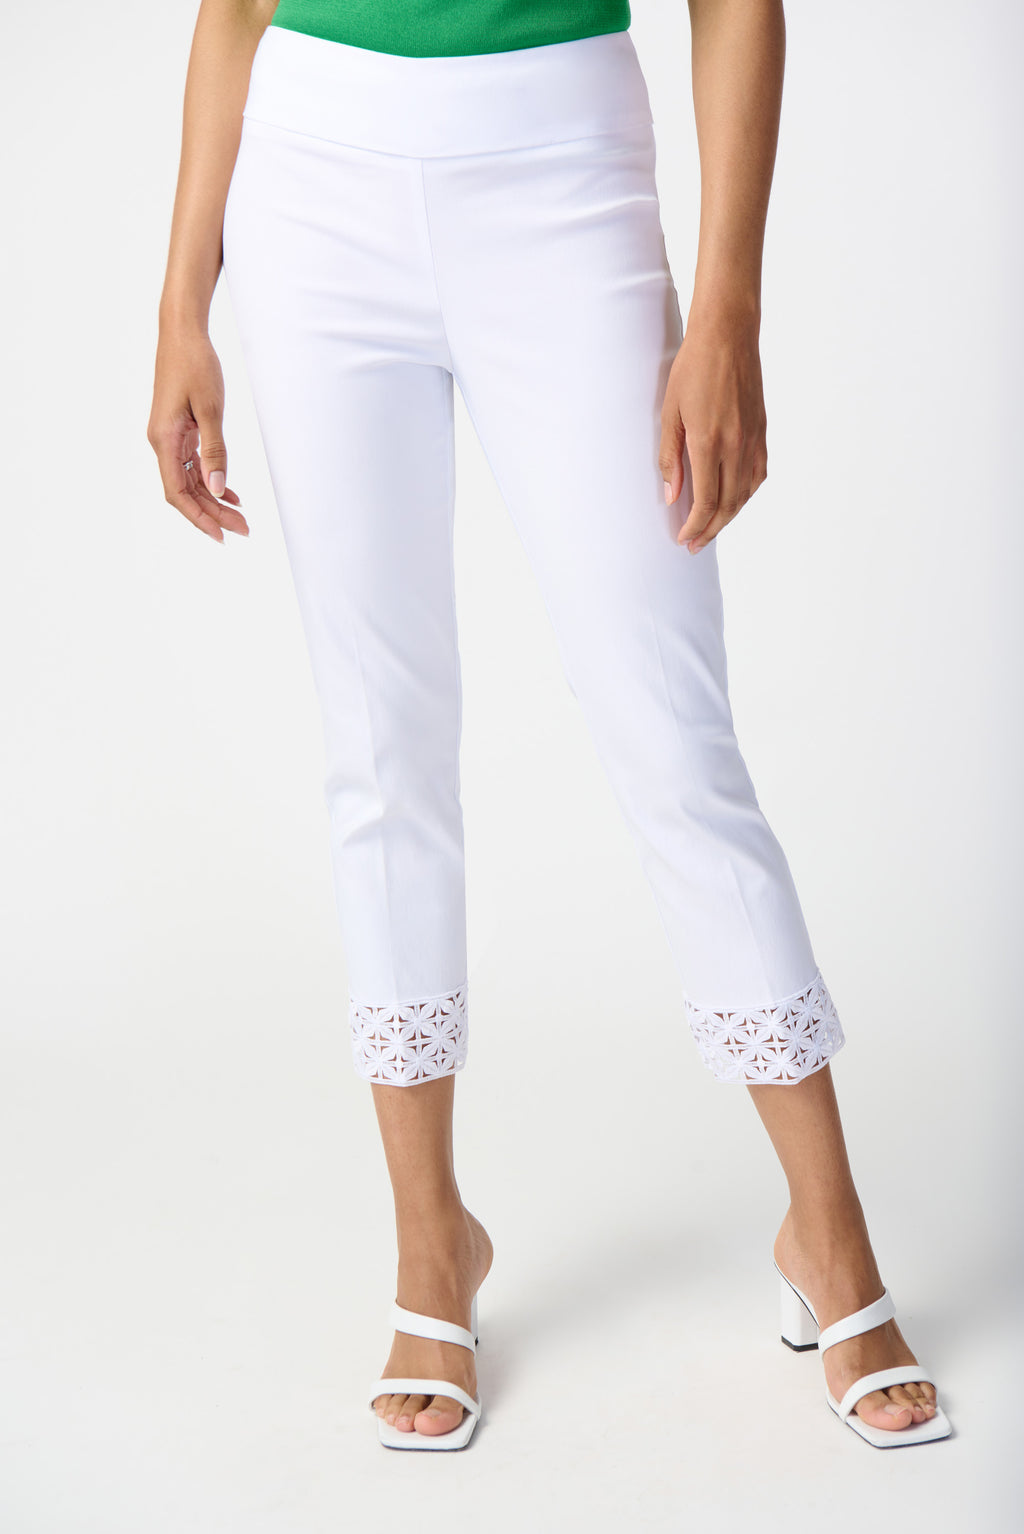 Take your look from day to night with these chic pull-on pants. Tailored with a cropped silhouette in a beautiful millennium fabric, this contemporary piece features a structured contour waistband, pairing style and comfort to perfection. A small Joseph Ribkoff ornament at the back of the pants and a lovely guipure detail at the hem put the finishing touch and add a hint more of elegance to this wardrobe staple.